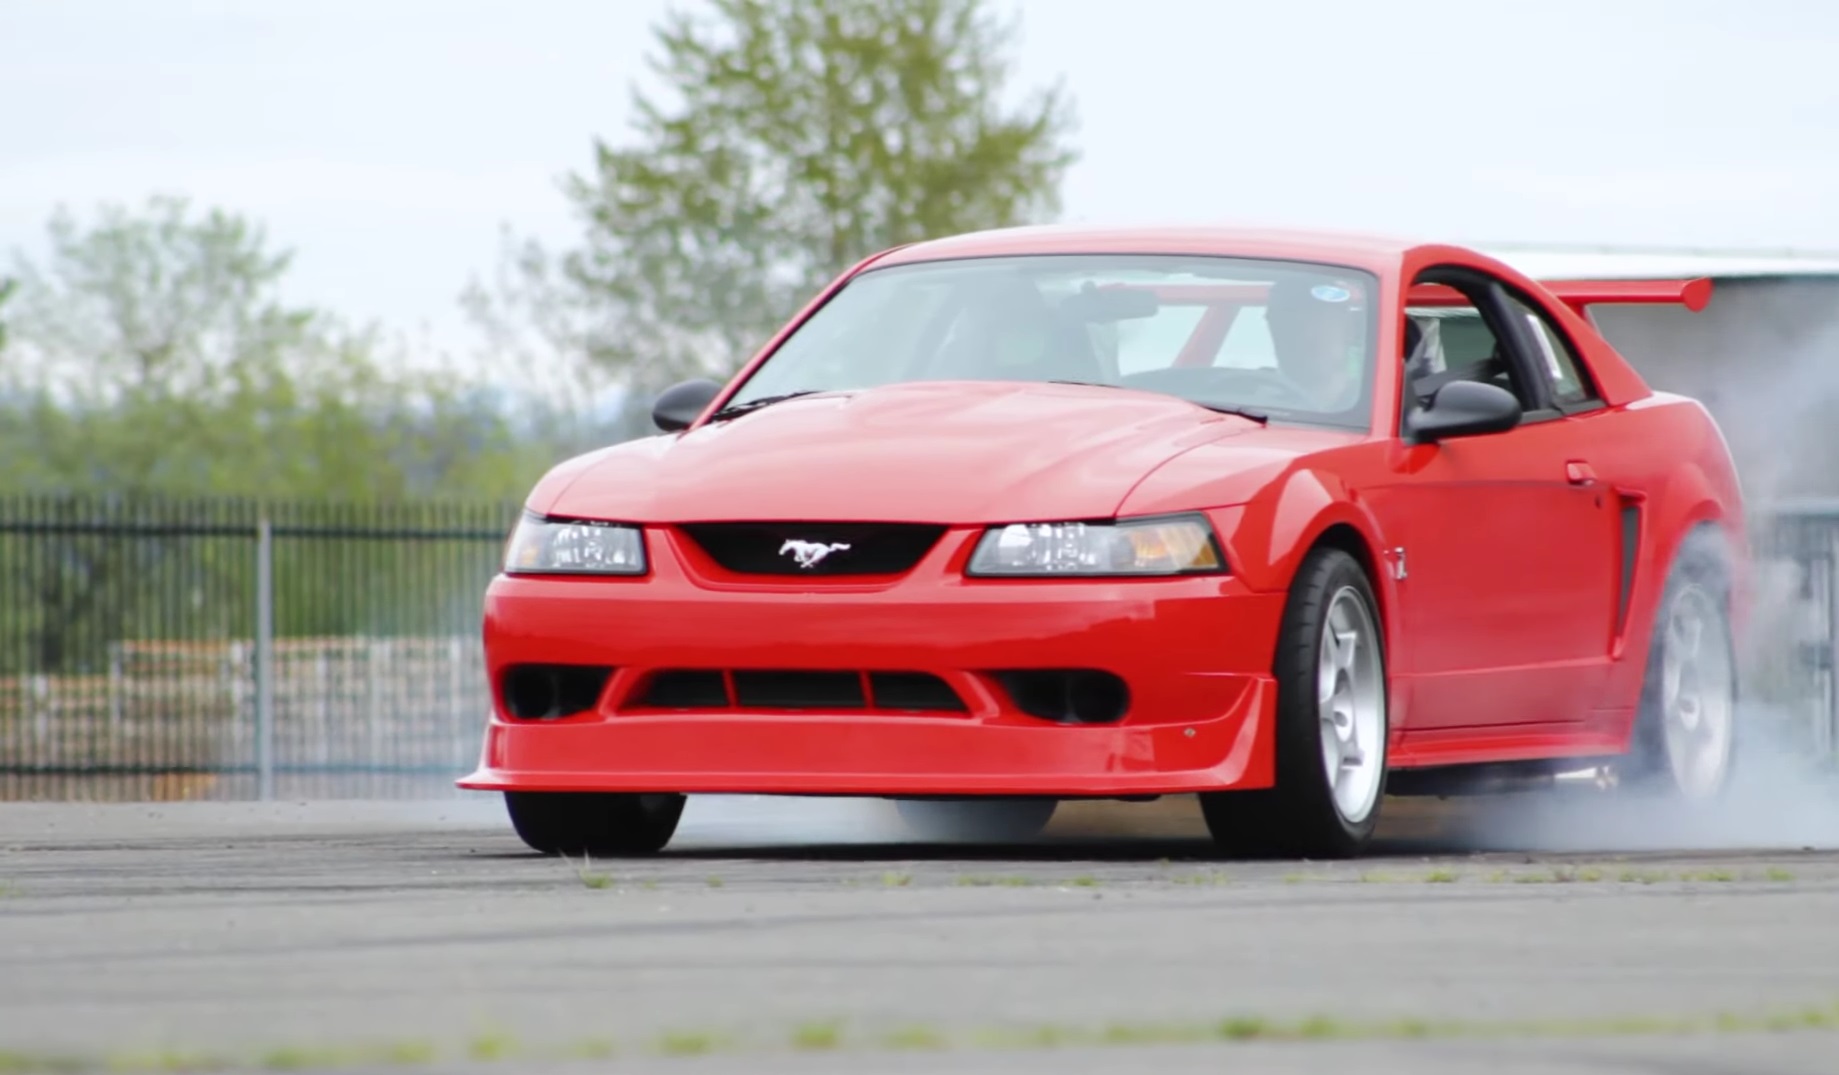 Video: 2000 Ford Mustang SVT Cobra R In-Depth Review